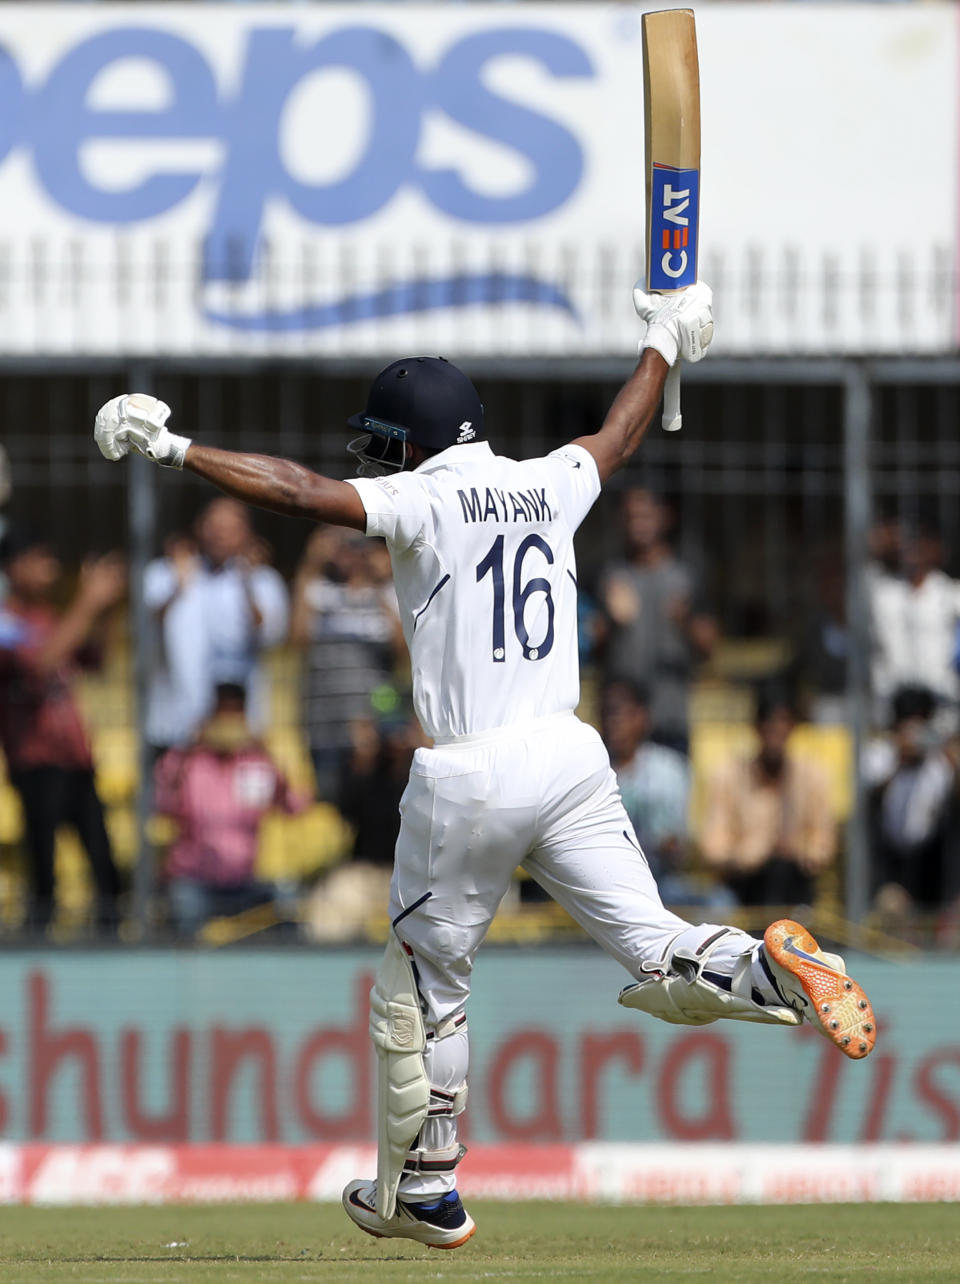 India's Mayank Agarwal runs to celebrate scoring a century during the second day of first cricket test match between India and Bangladesh in Indore, India, Friday, Nov. 15, 2019. (AP Photo/Aijaz Rahi)